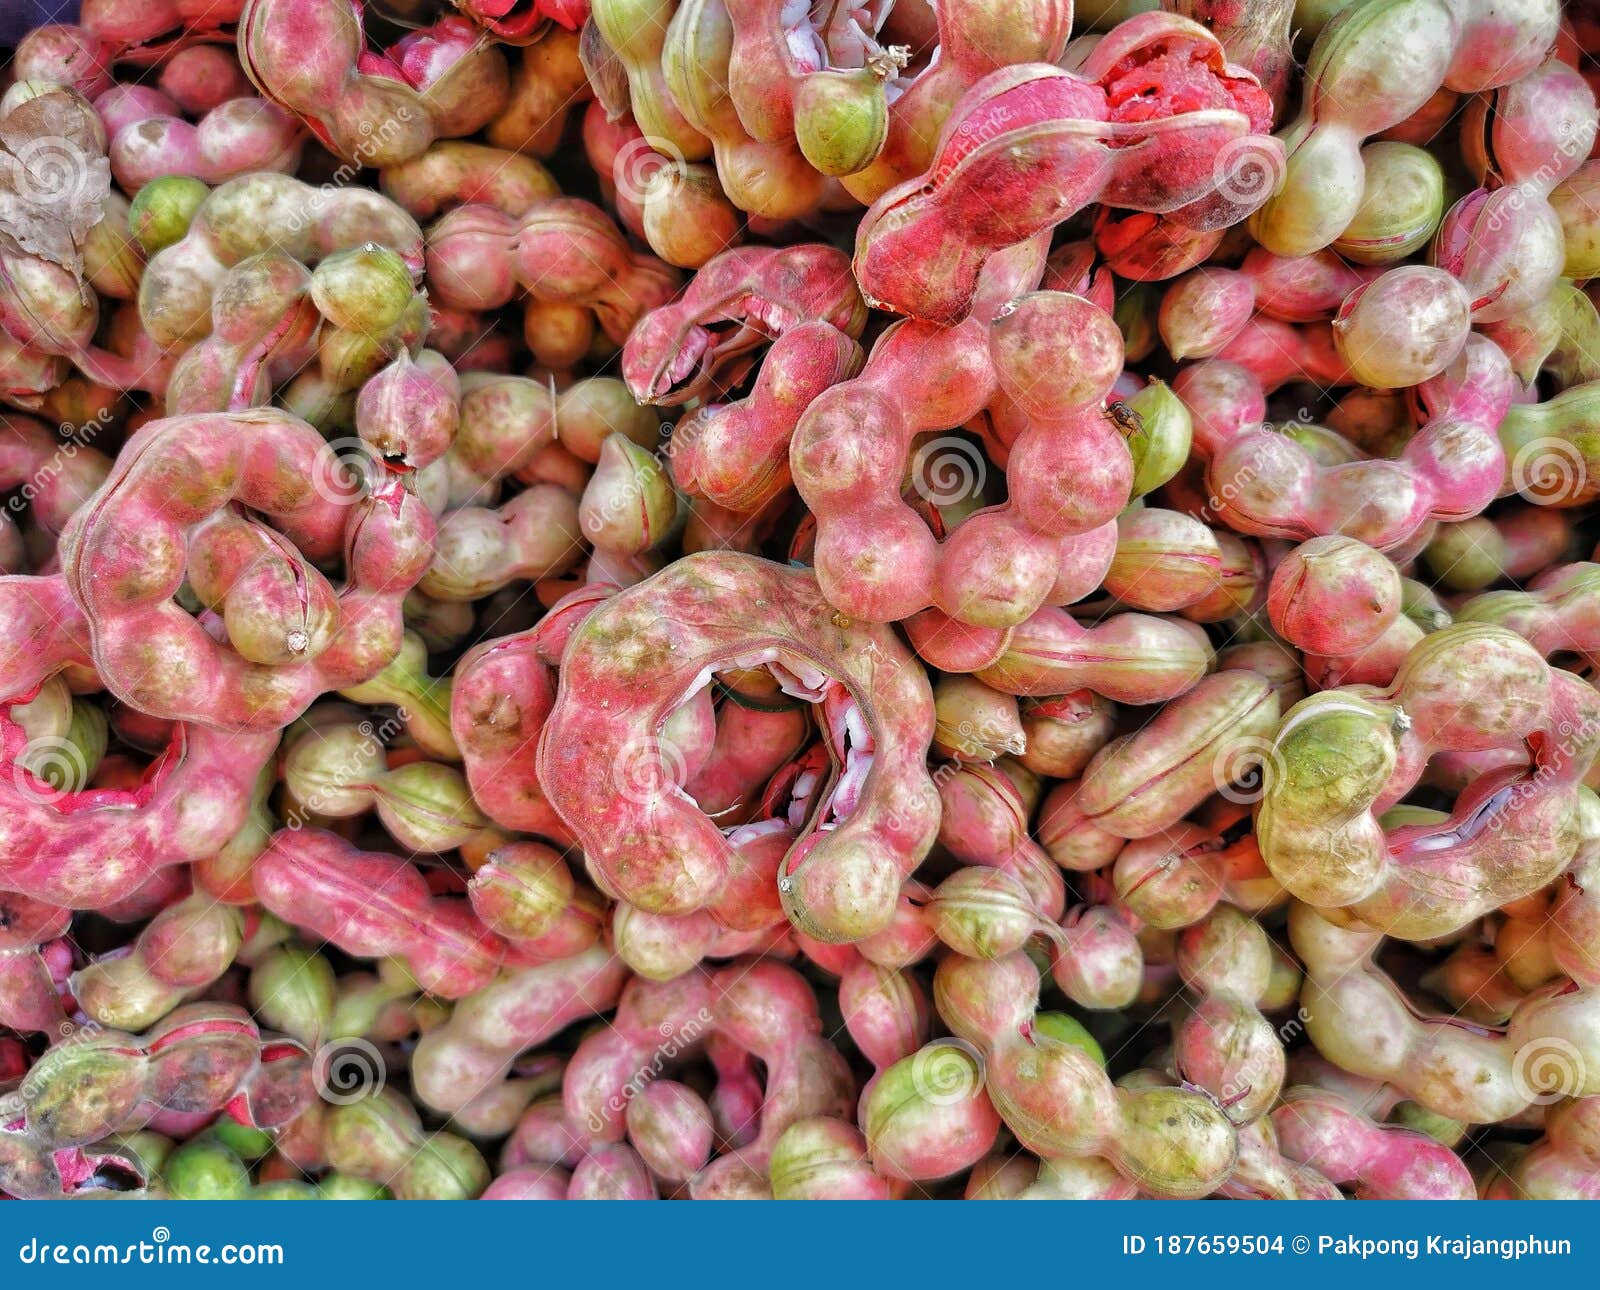 Manila Tamarind Fruit Is Red Color Stock Photo Image Of Fruit Agriculture